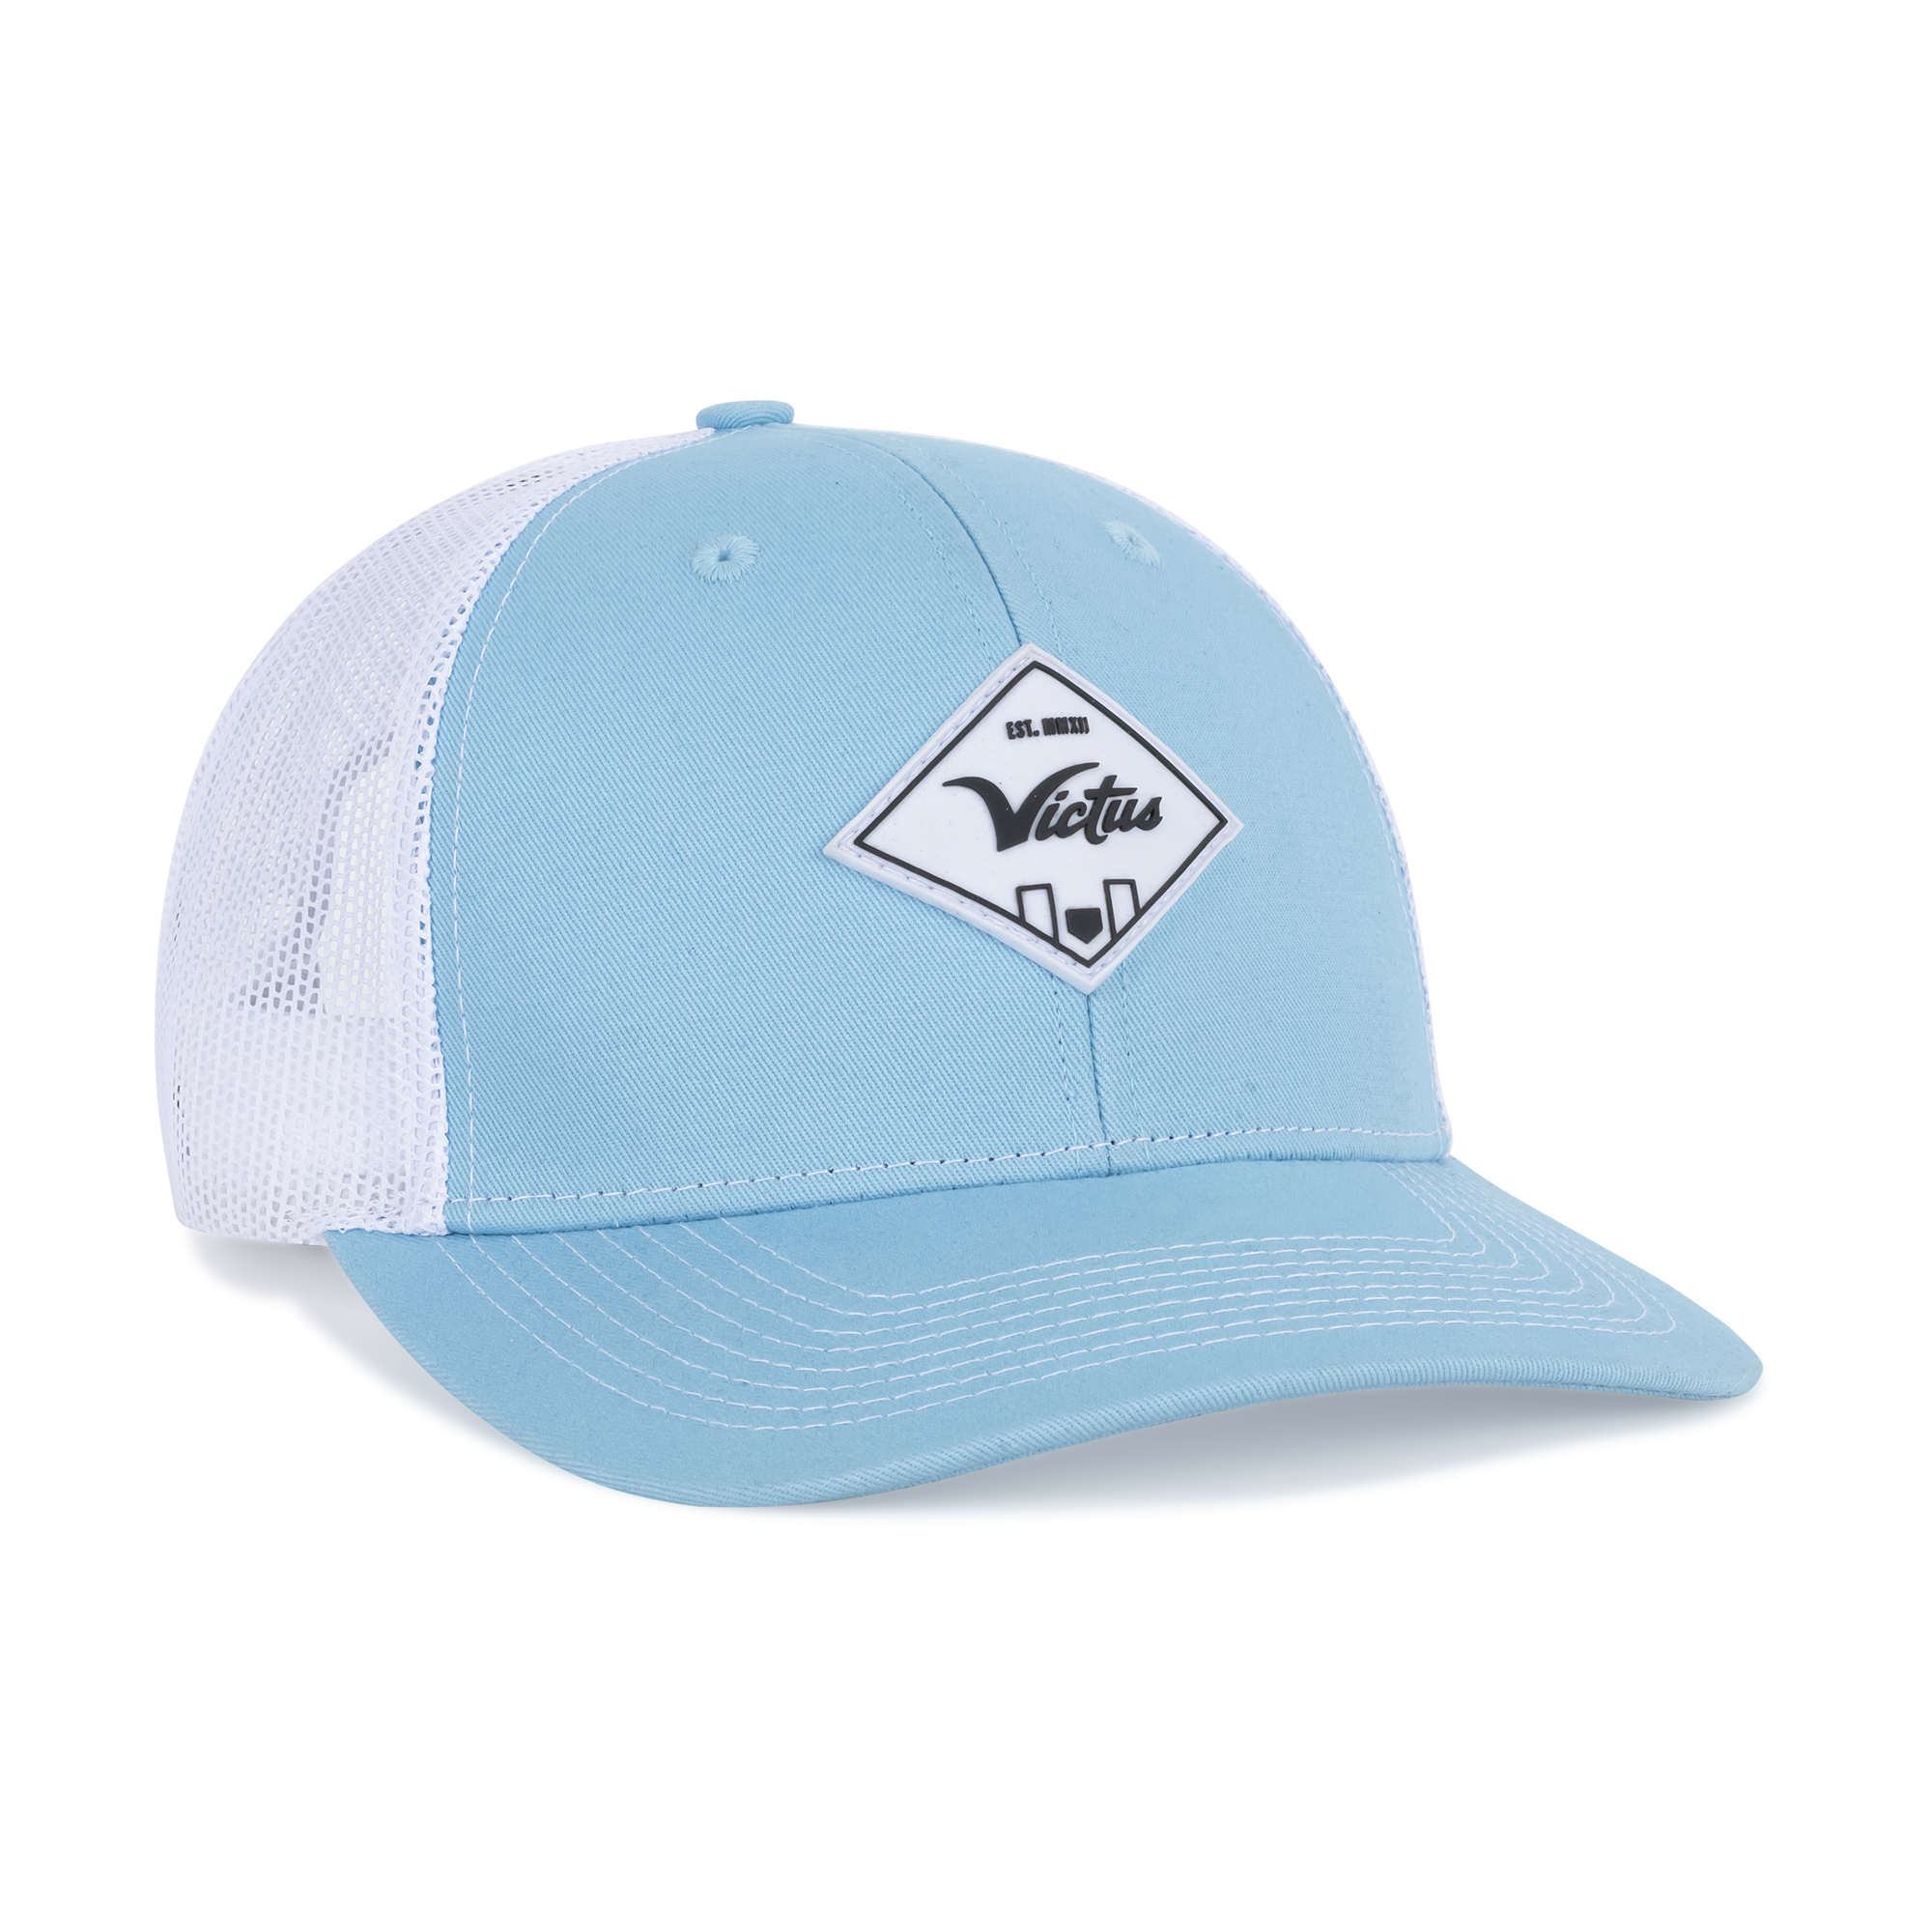 Limited edition Powder Blue Trucker Hat with velcro back